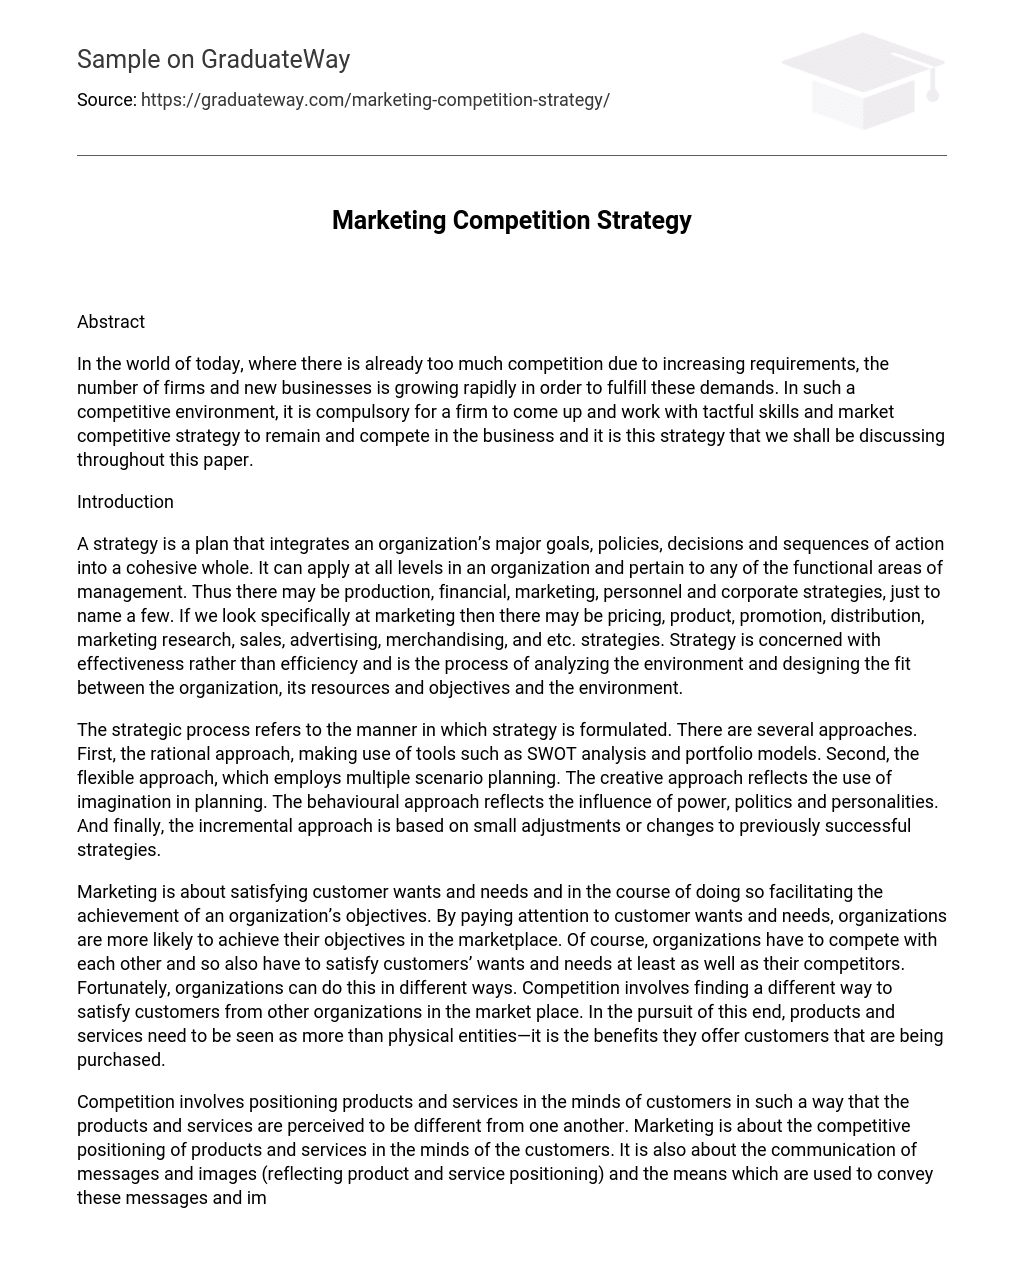 Marketing Competition Strategy